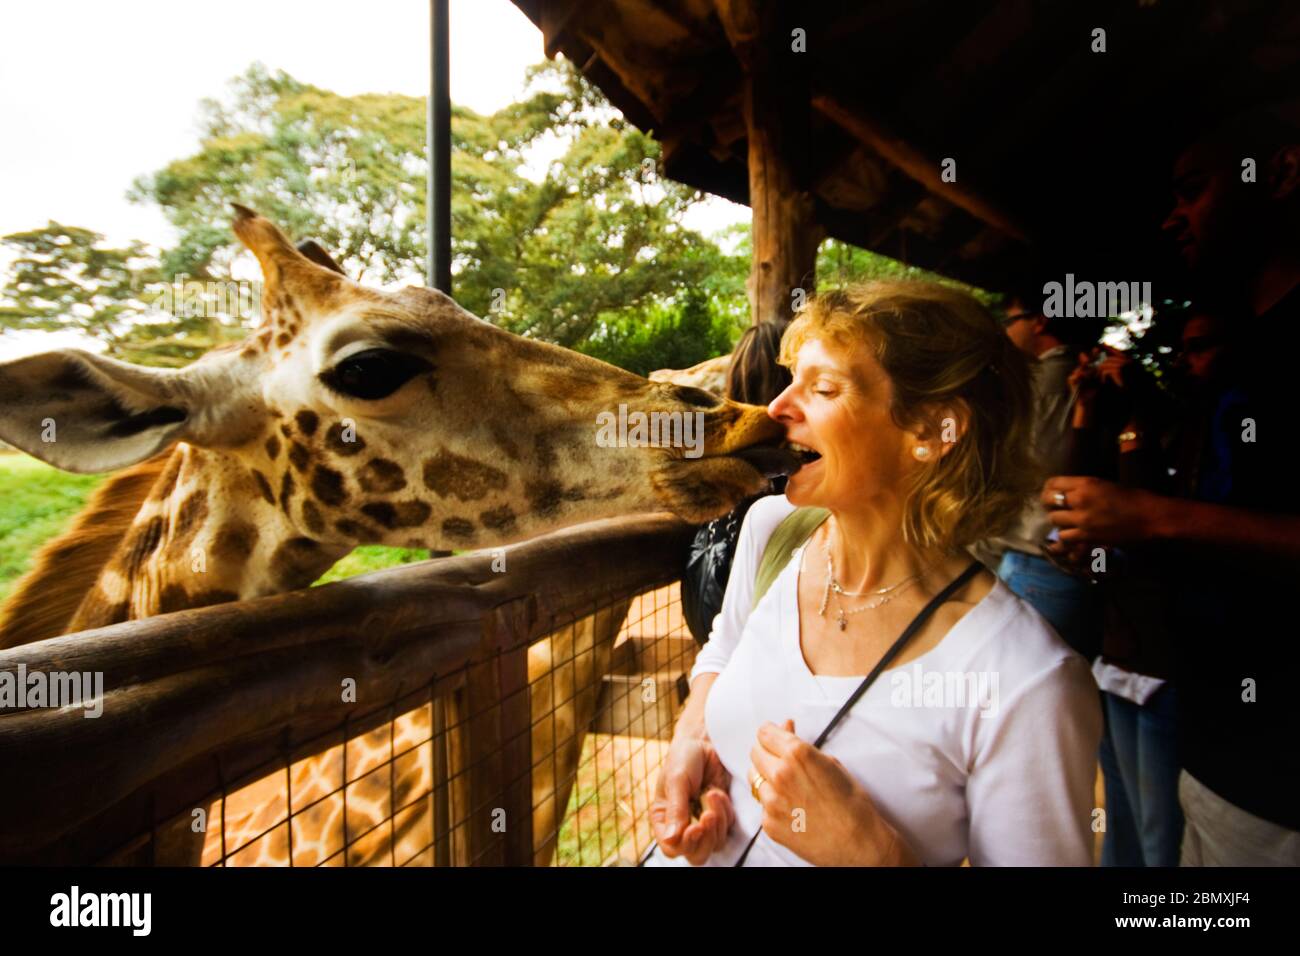 A women being licked be a giraffe on a platform in Kenya, Africa Stock Photo